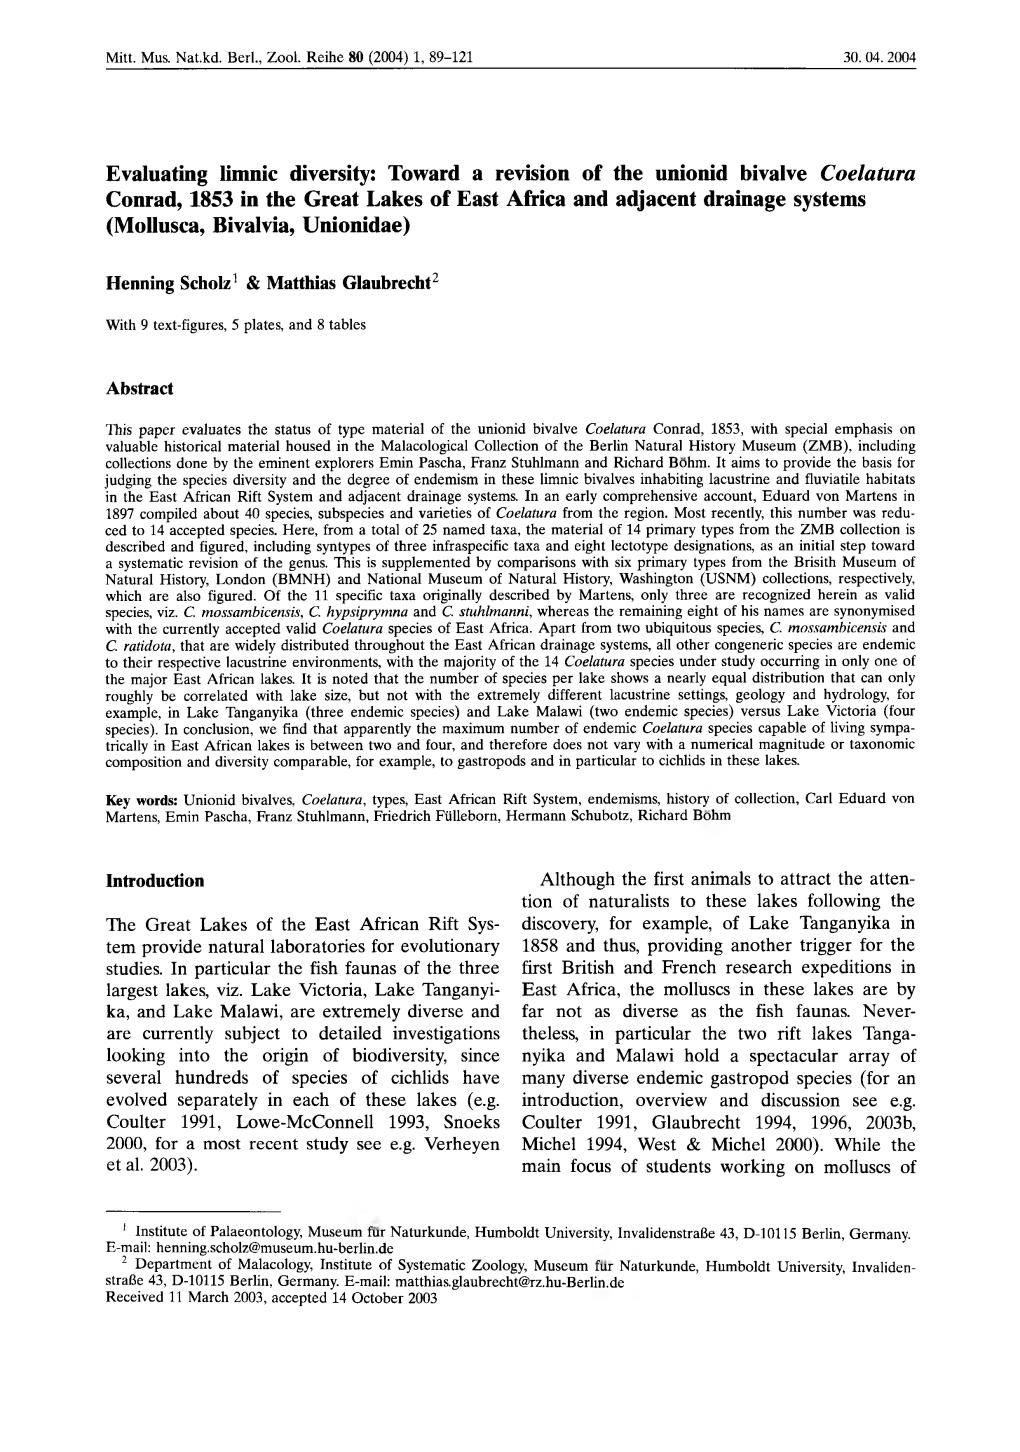 Toward a Revision of the Unionid Bivalve Coelatura Conrad, 1853 in the Great Lakes of East Africa and Adjacent Drainage Systems (Mollusca, Bivalvia, Unionidae)